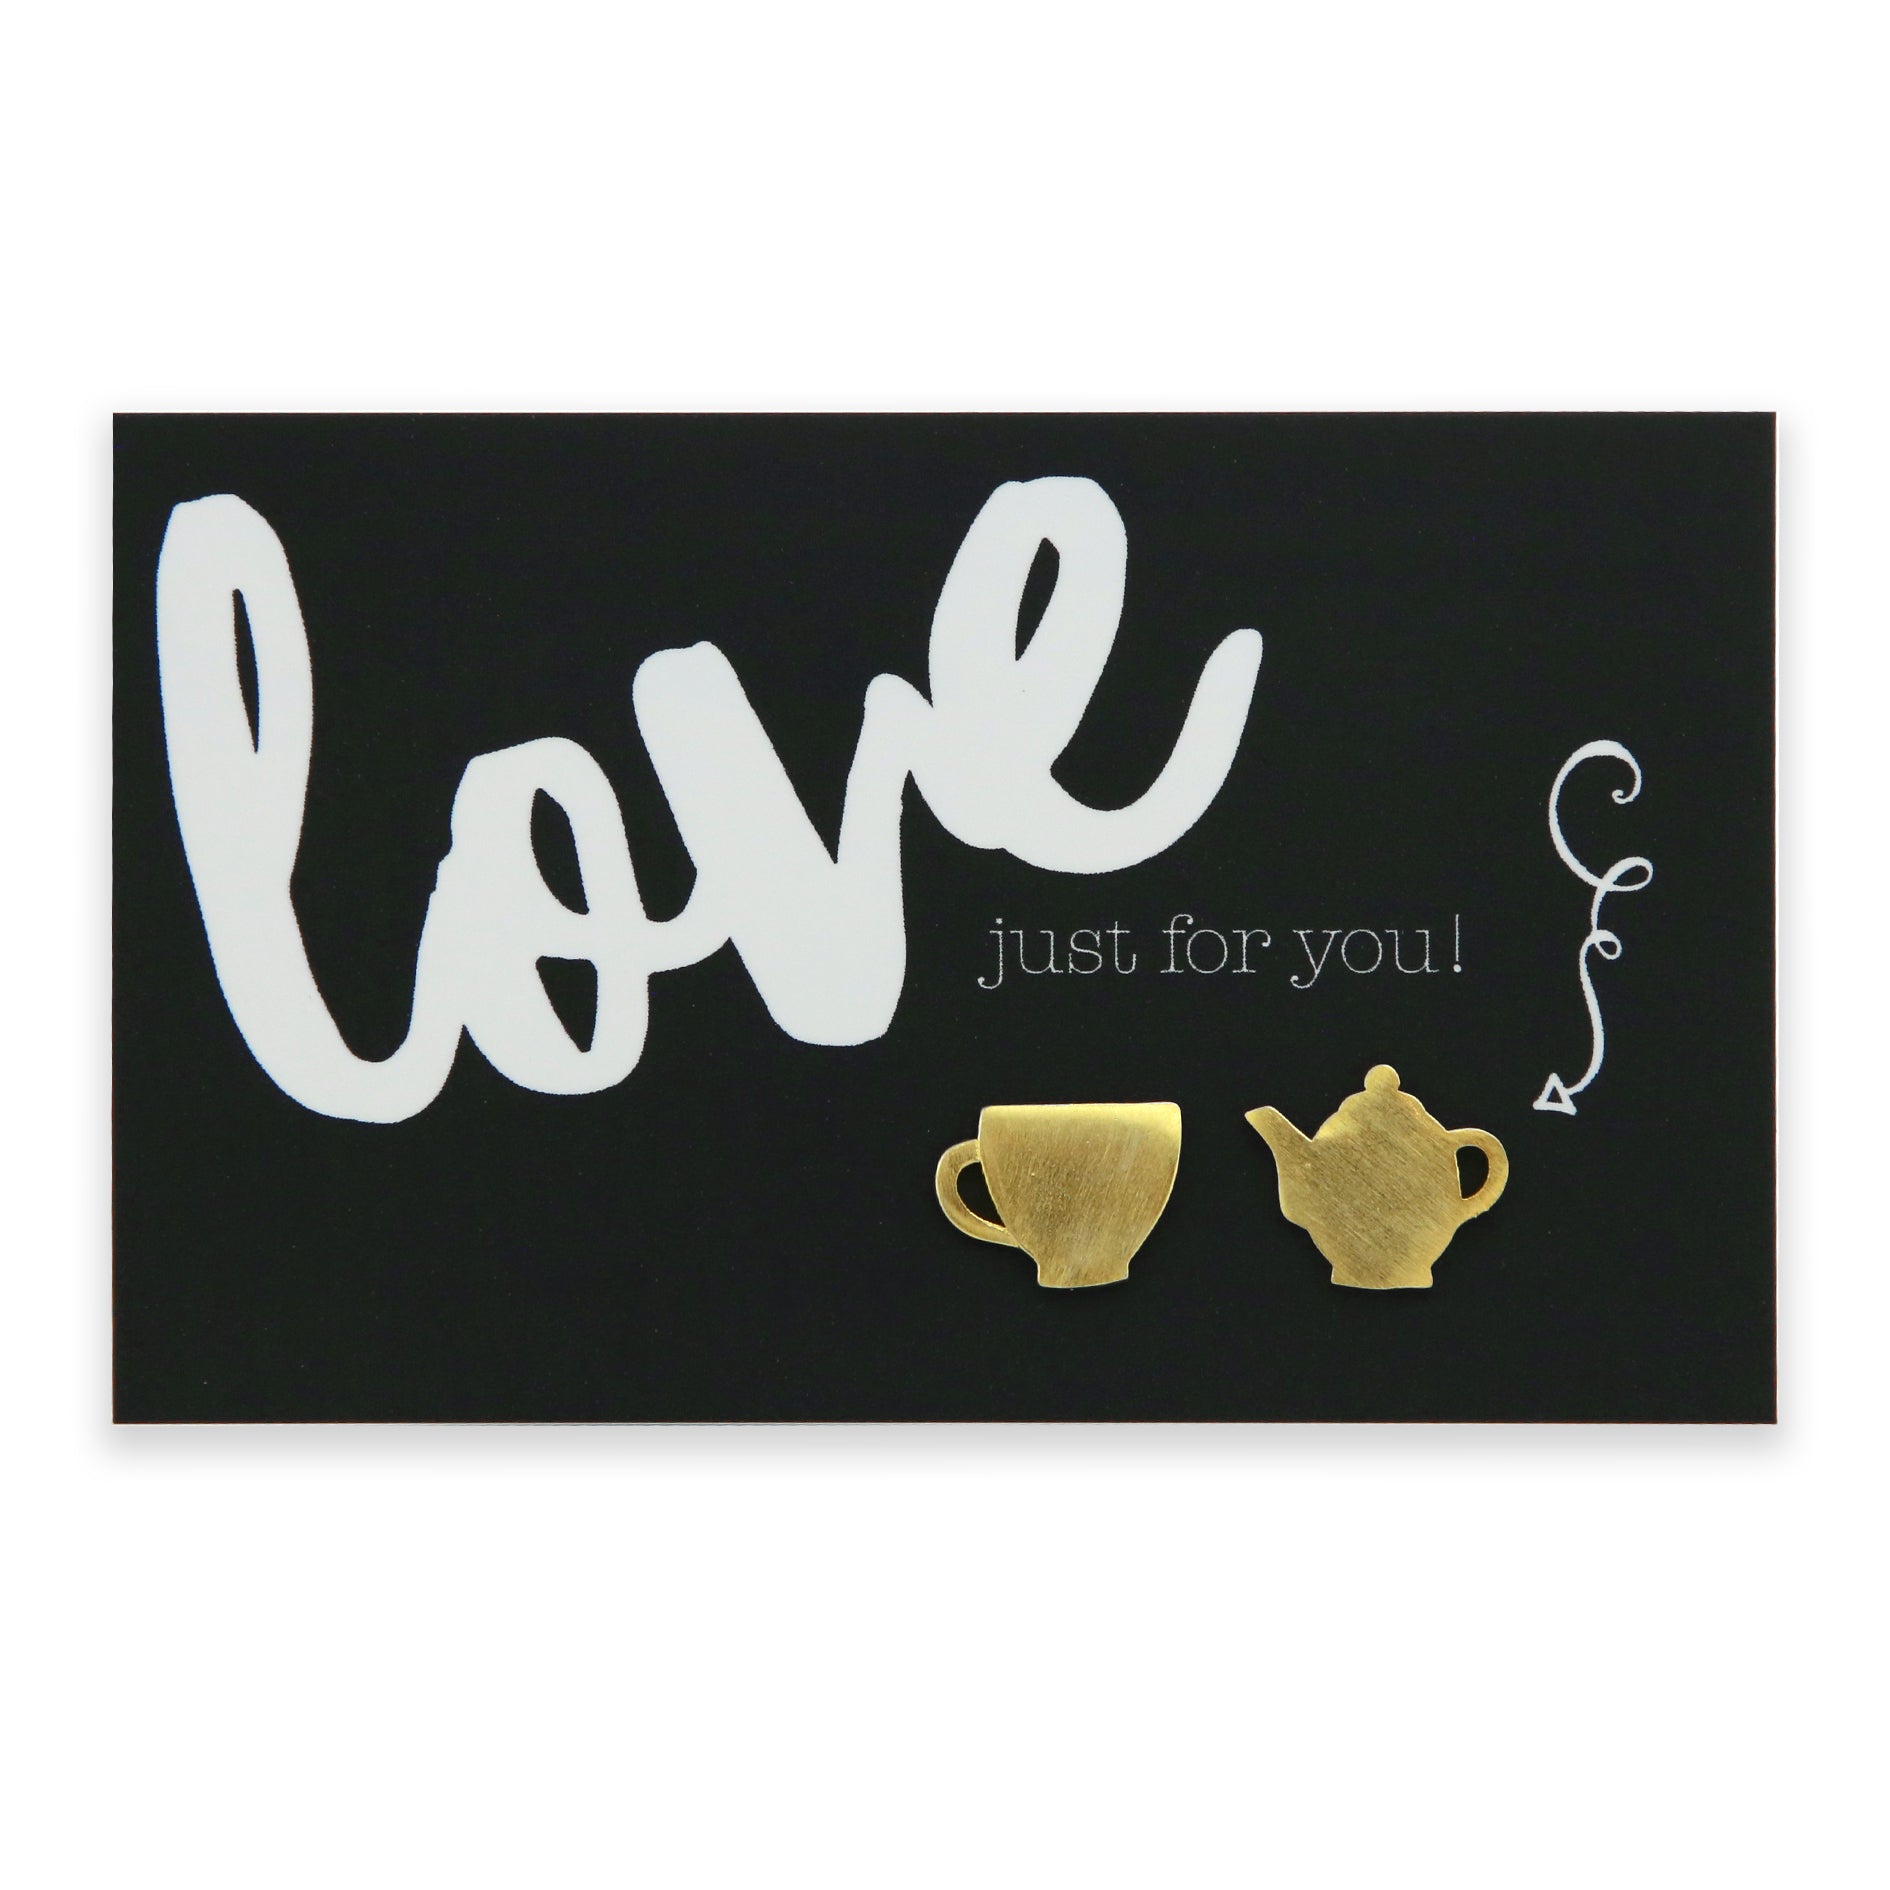 Love Just For You! Tea Time Stud Earrings - Gold (11511)